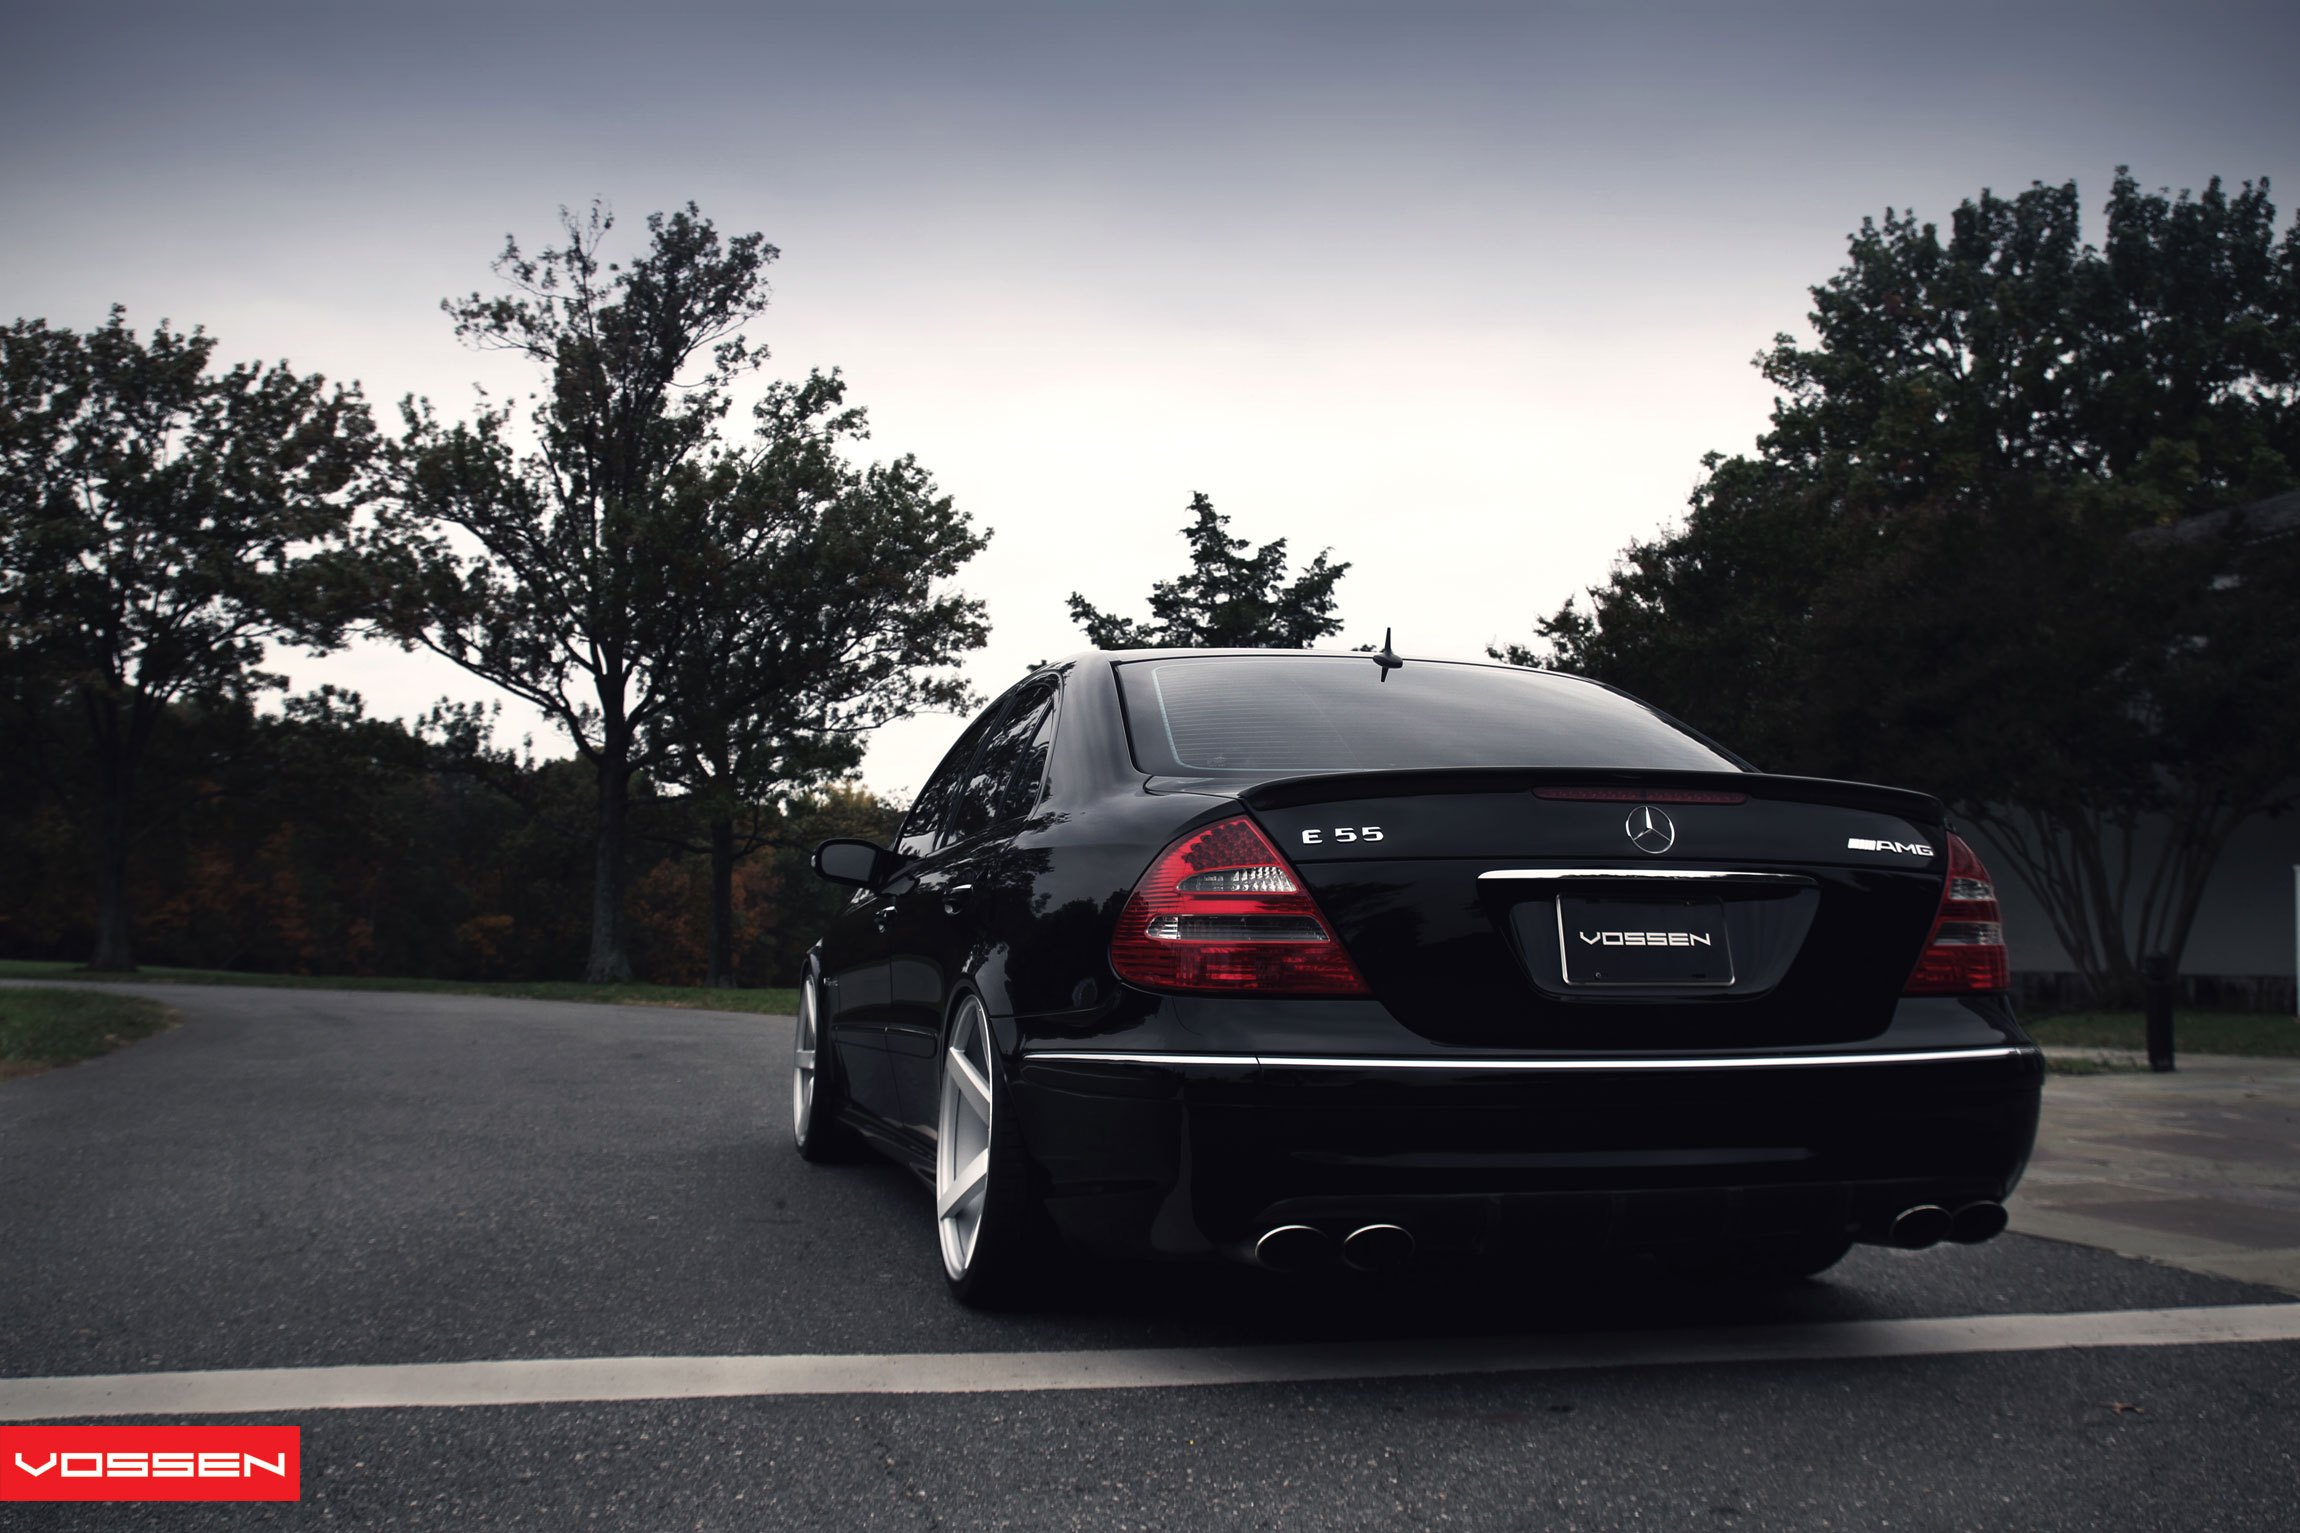 Custom Exhaust System on Black Mercedes E Class - Photo by Vossen